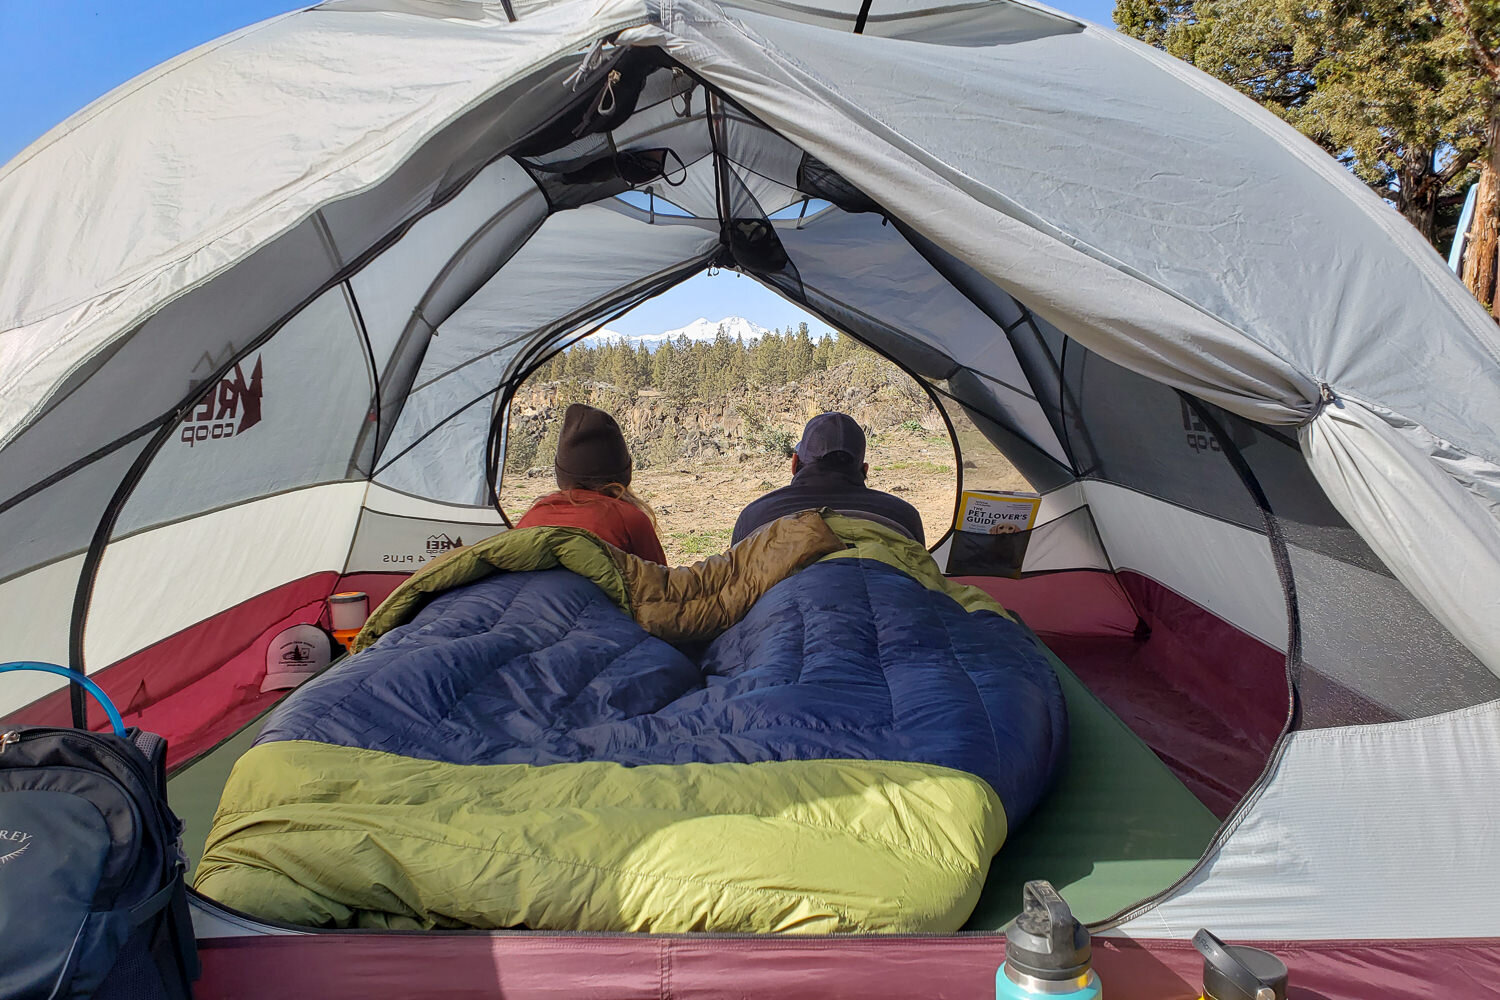 The Enlightened Equipment Accomplice 20 is our favorite ulralight sleep system for two.